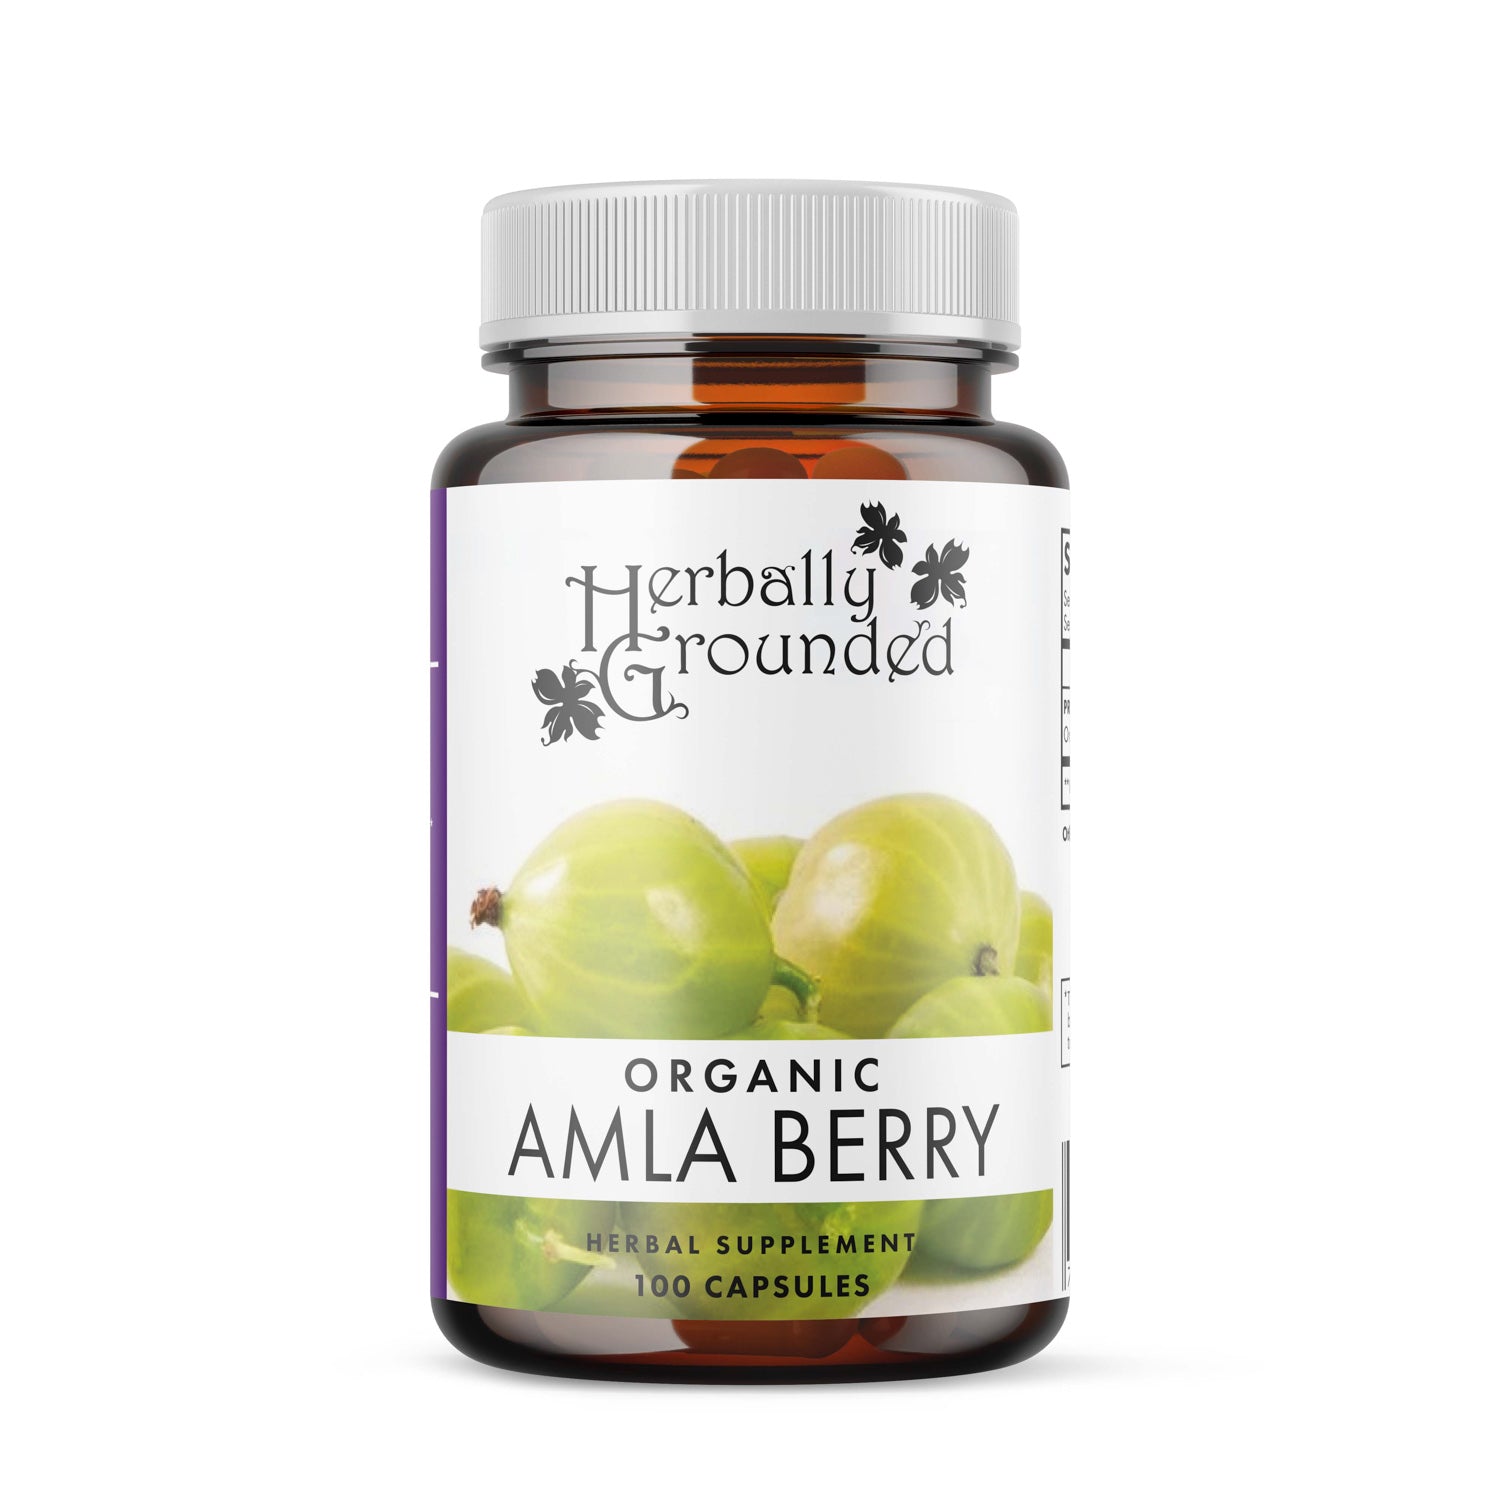 Alma Fruit Extract - Shieling Laboratories